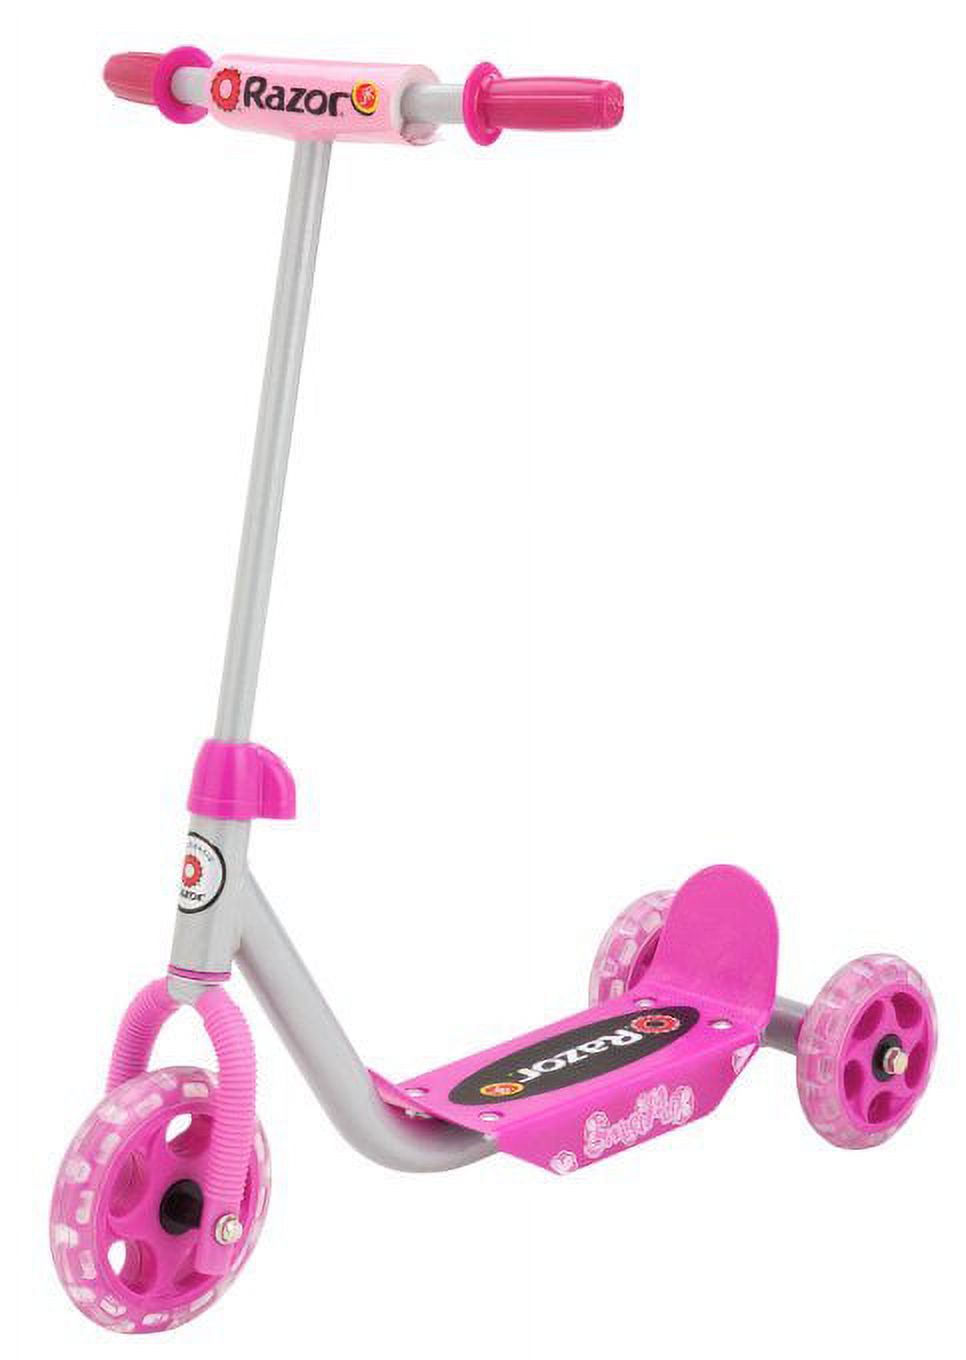 Razor Jr. 3-Wheel Lil' Kick Scooter - Ages 3+ and riders up to 44 lbs - image 1 of 7